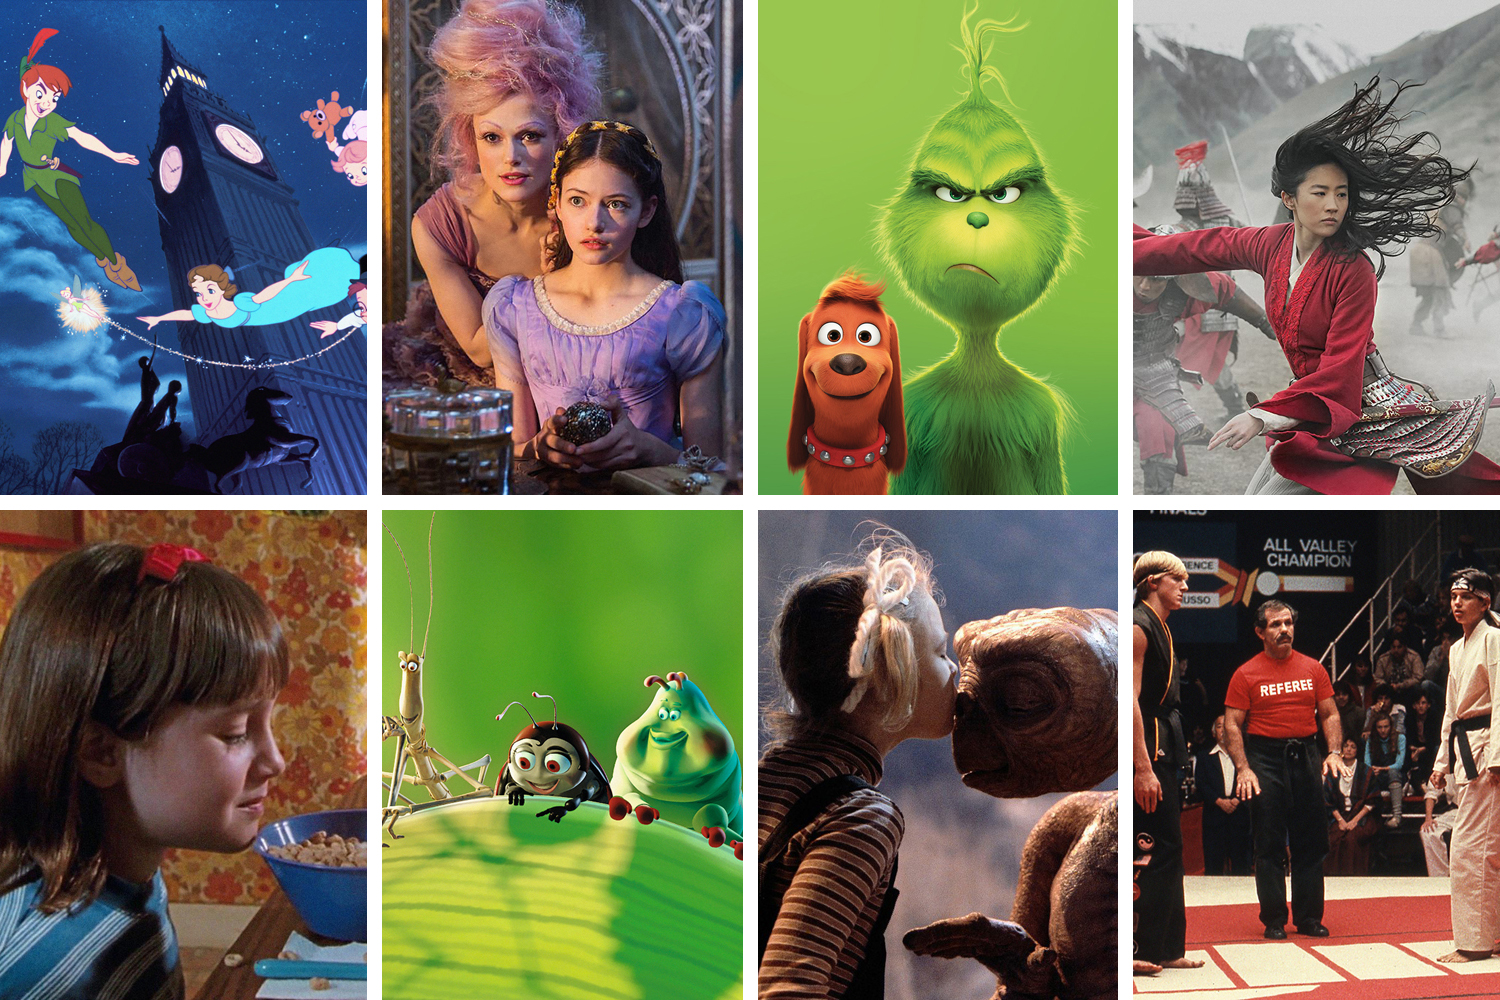 20 best family films ever to watch in the UAE Kids, FILMS, Movies